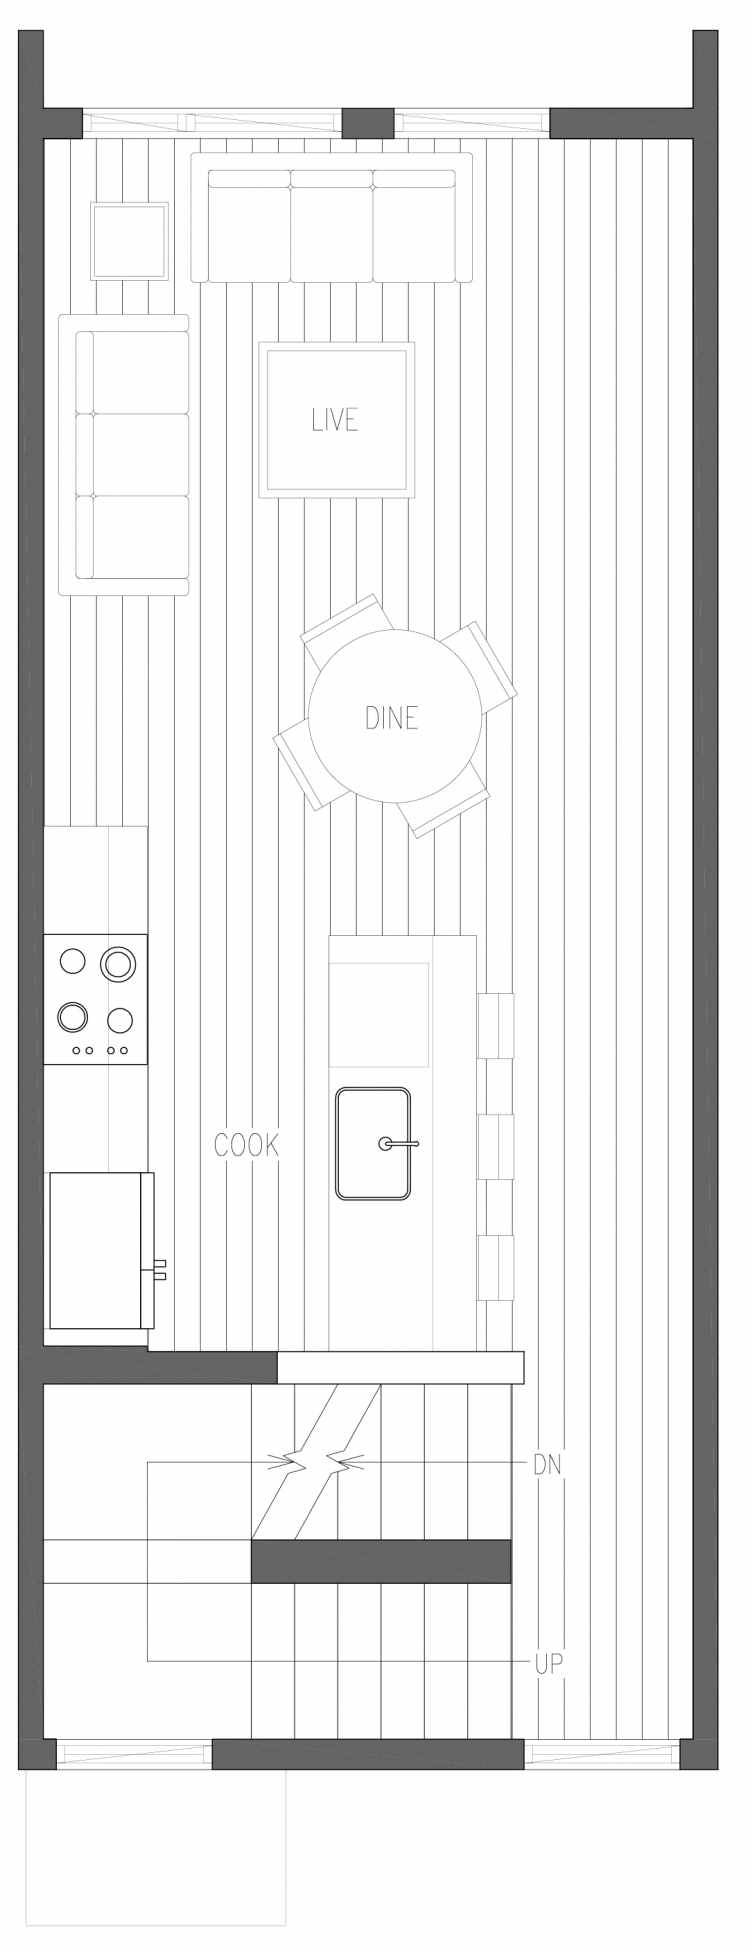 Second Floor Plan of 6415 14th Ave NW, One of the Oleana Townhomes in Ballard by Isola Homes